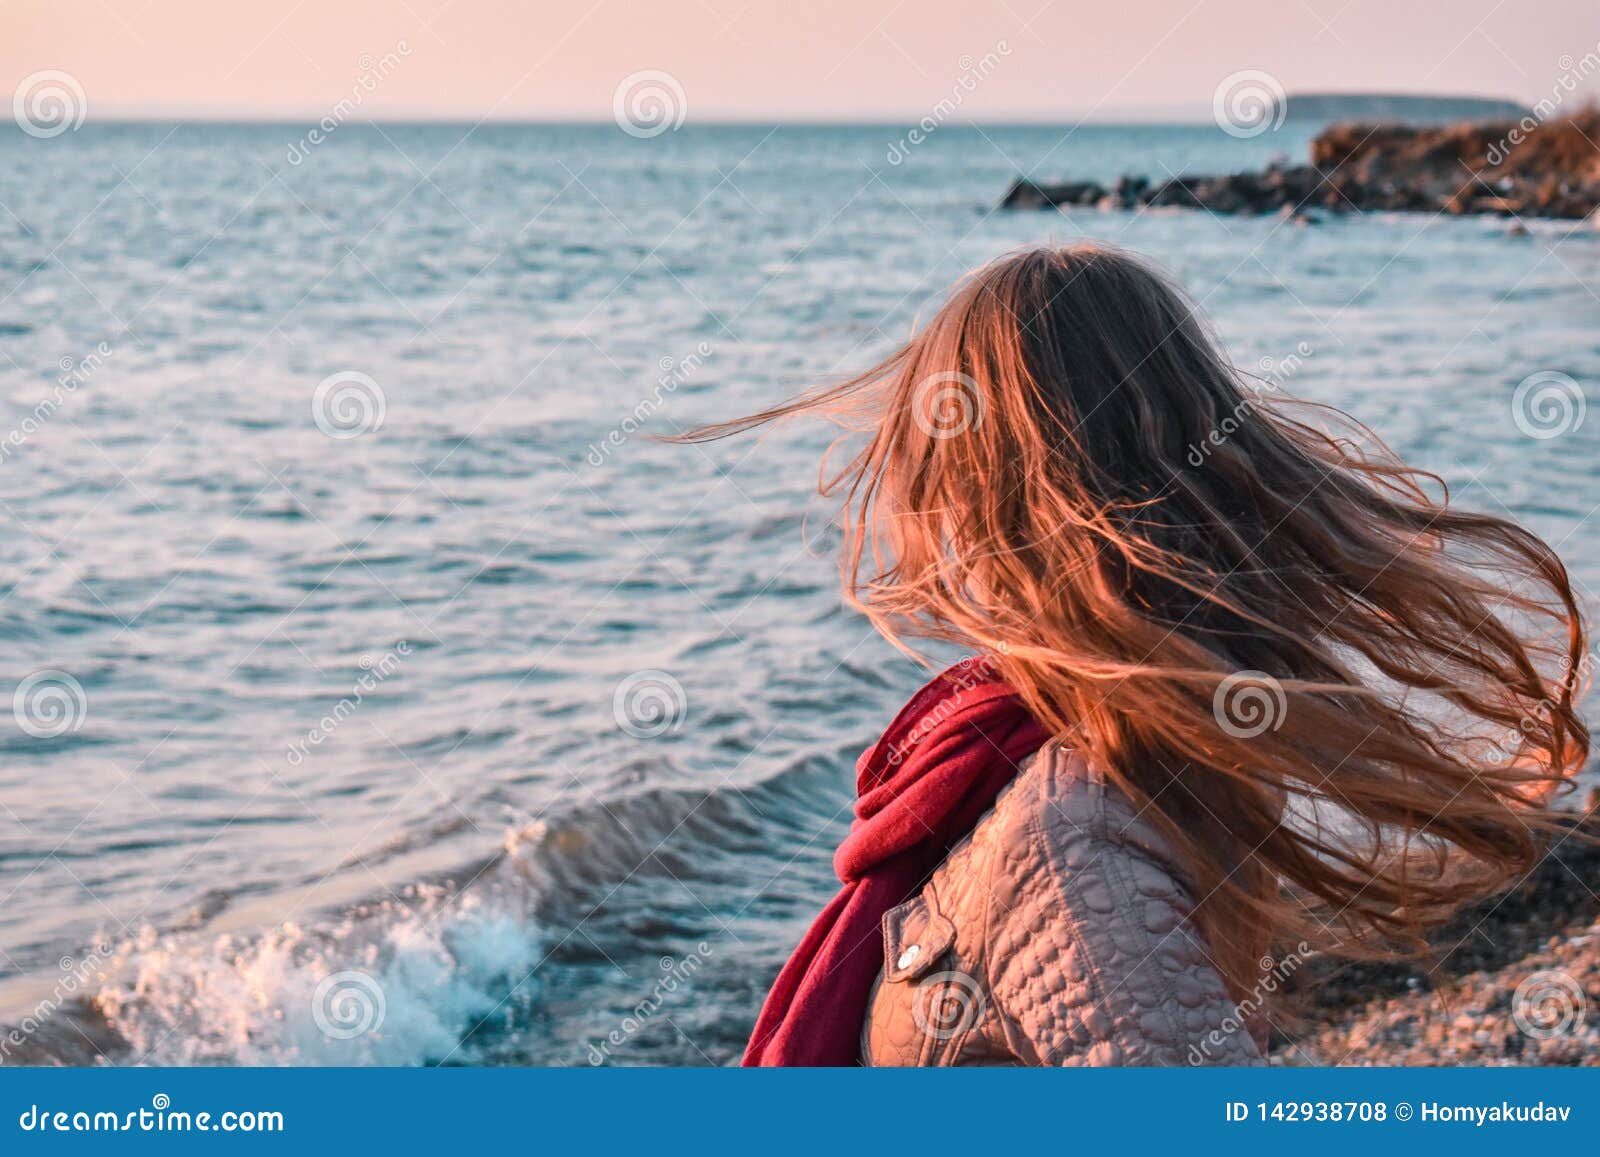 Ветер дует волосах. Wind blowing. Hair Wind girl from back. Back view of a woman blowing her hair in the Wind on the Beach.